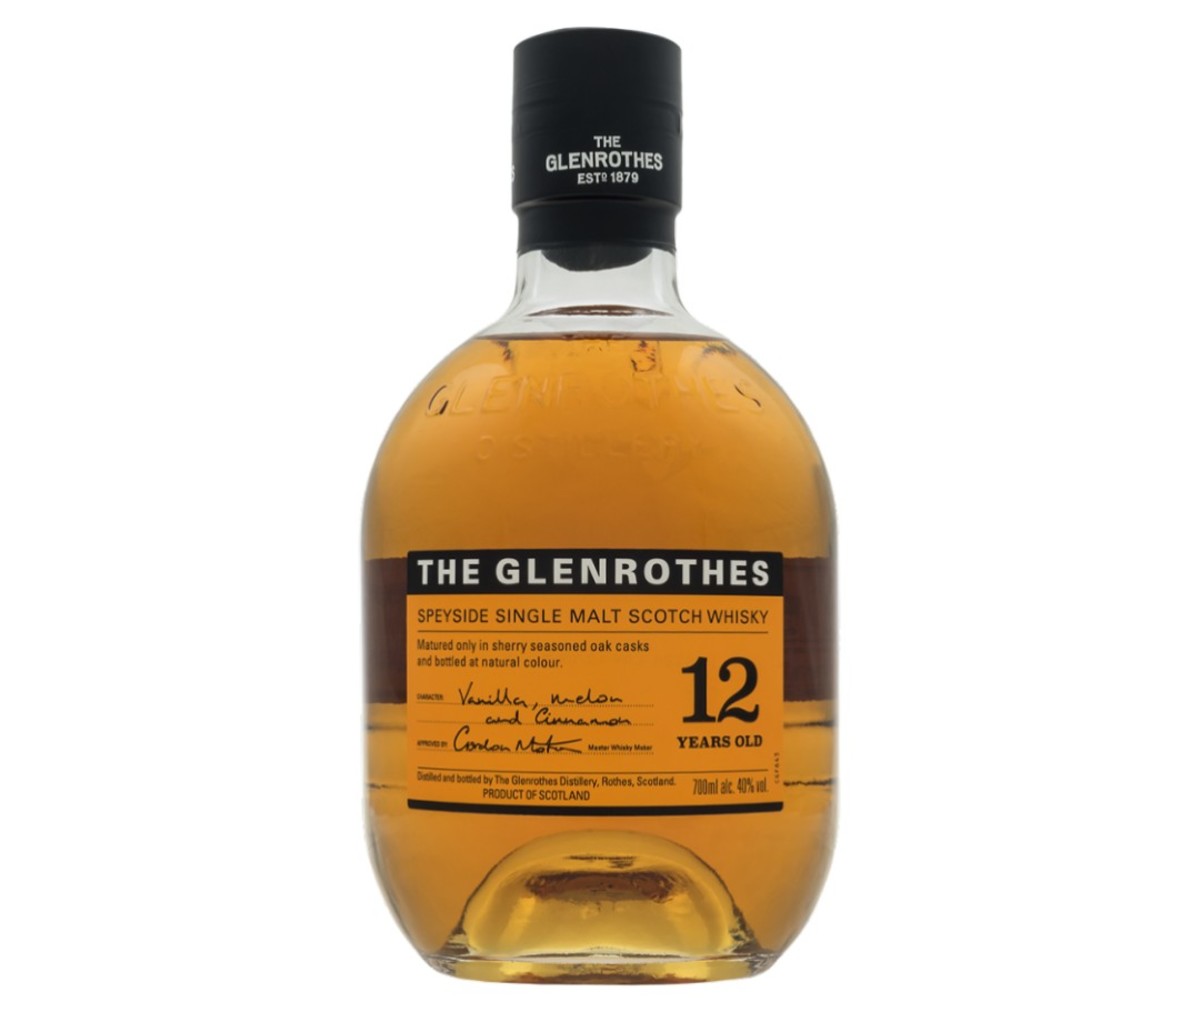 A bottle of The Glenrothes 12